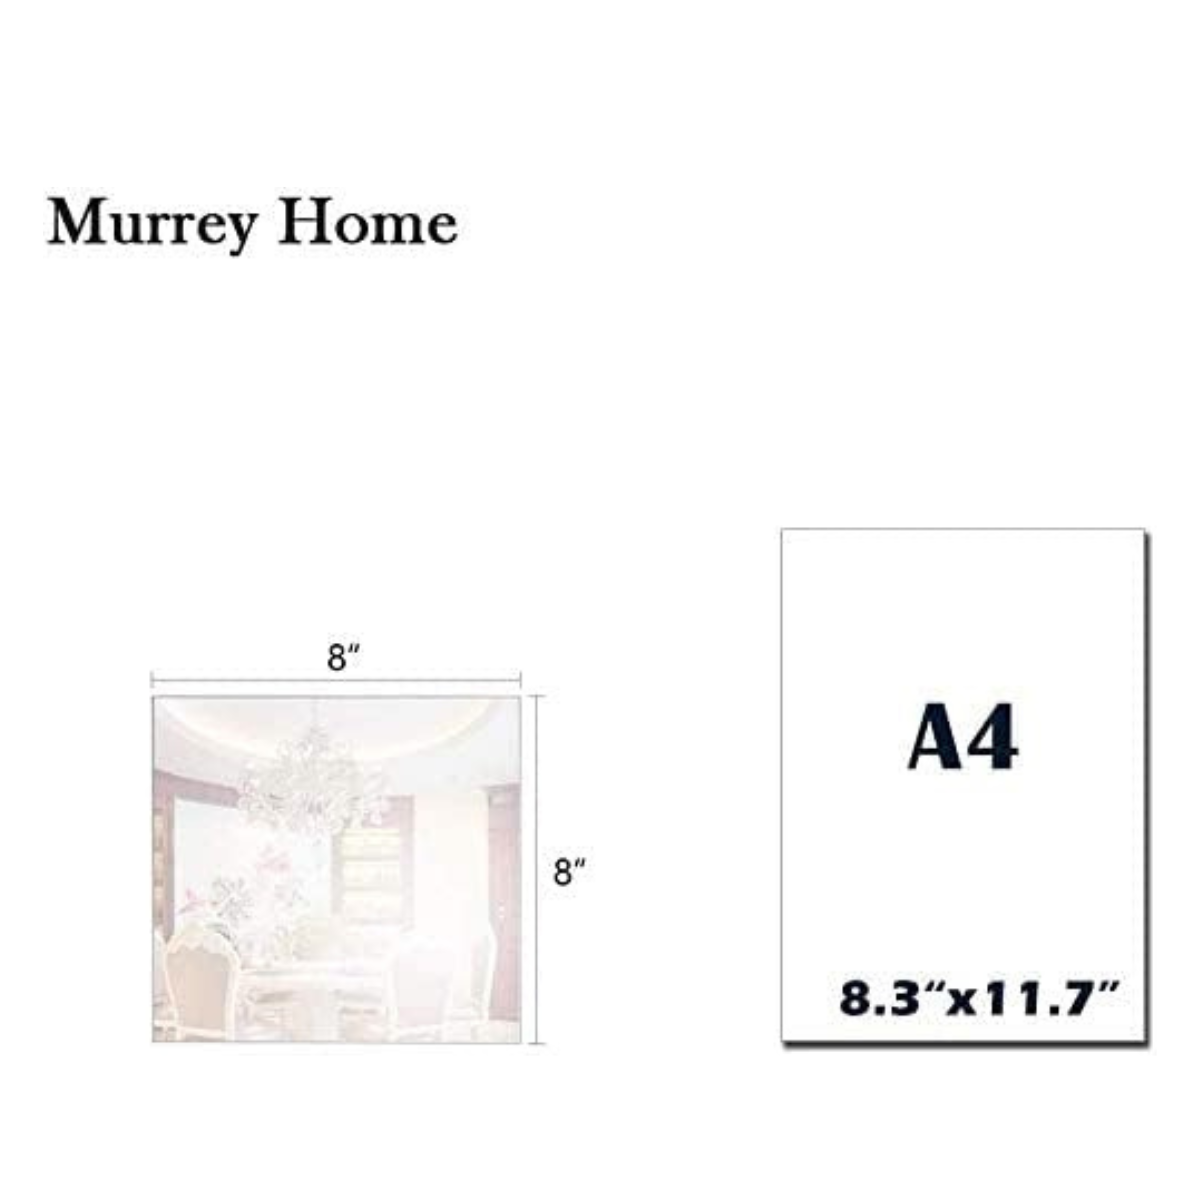 Murrey Home Gym Frameless Mirror Tiles 8" Square Wall Mounted